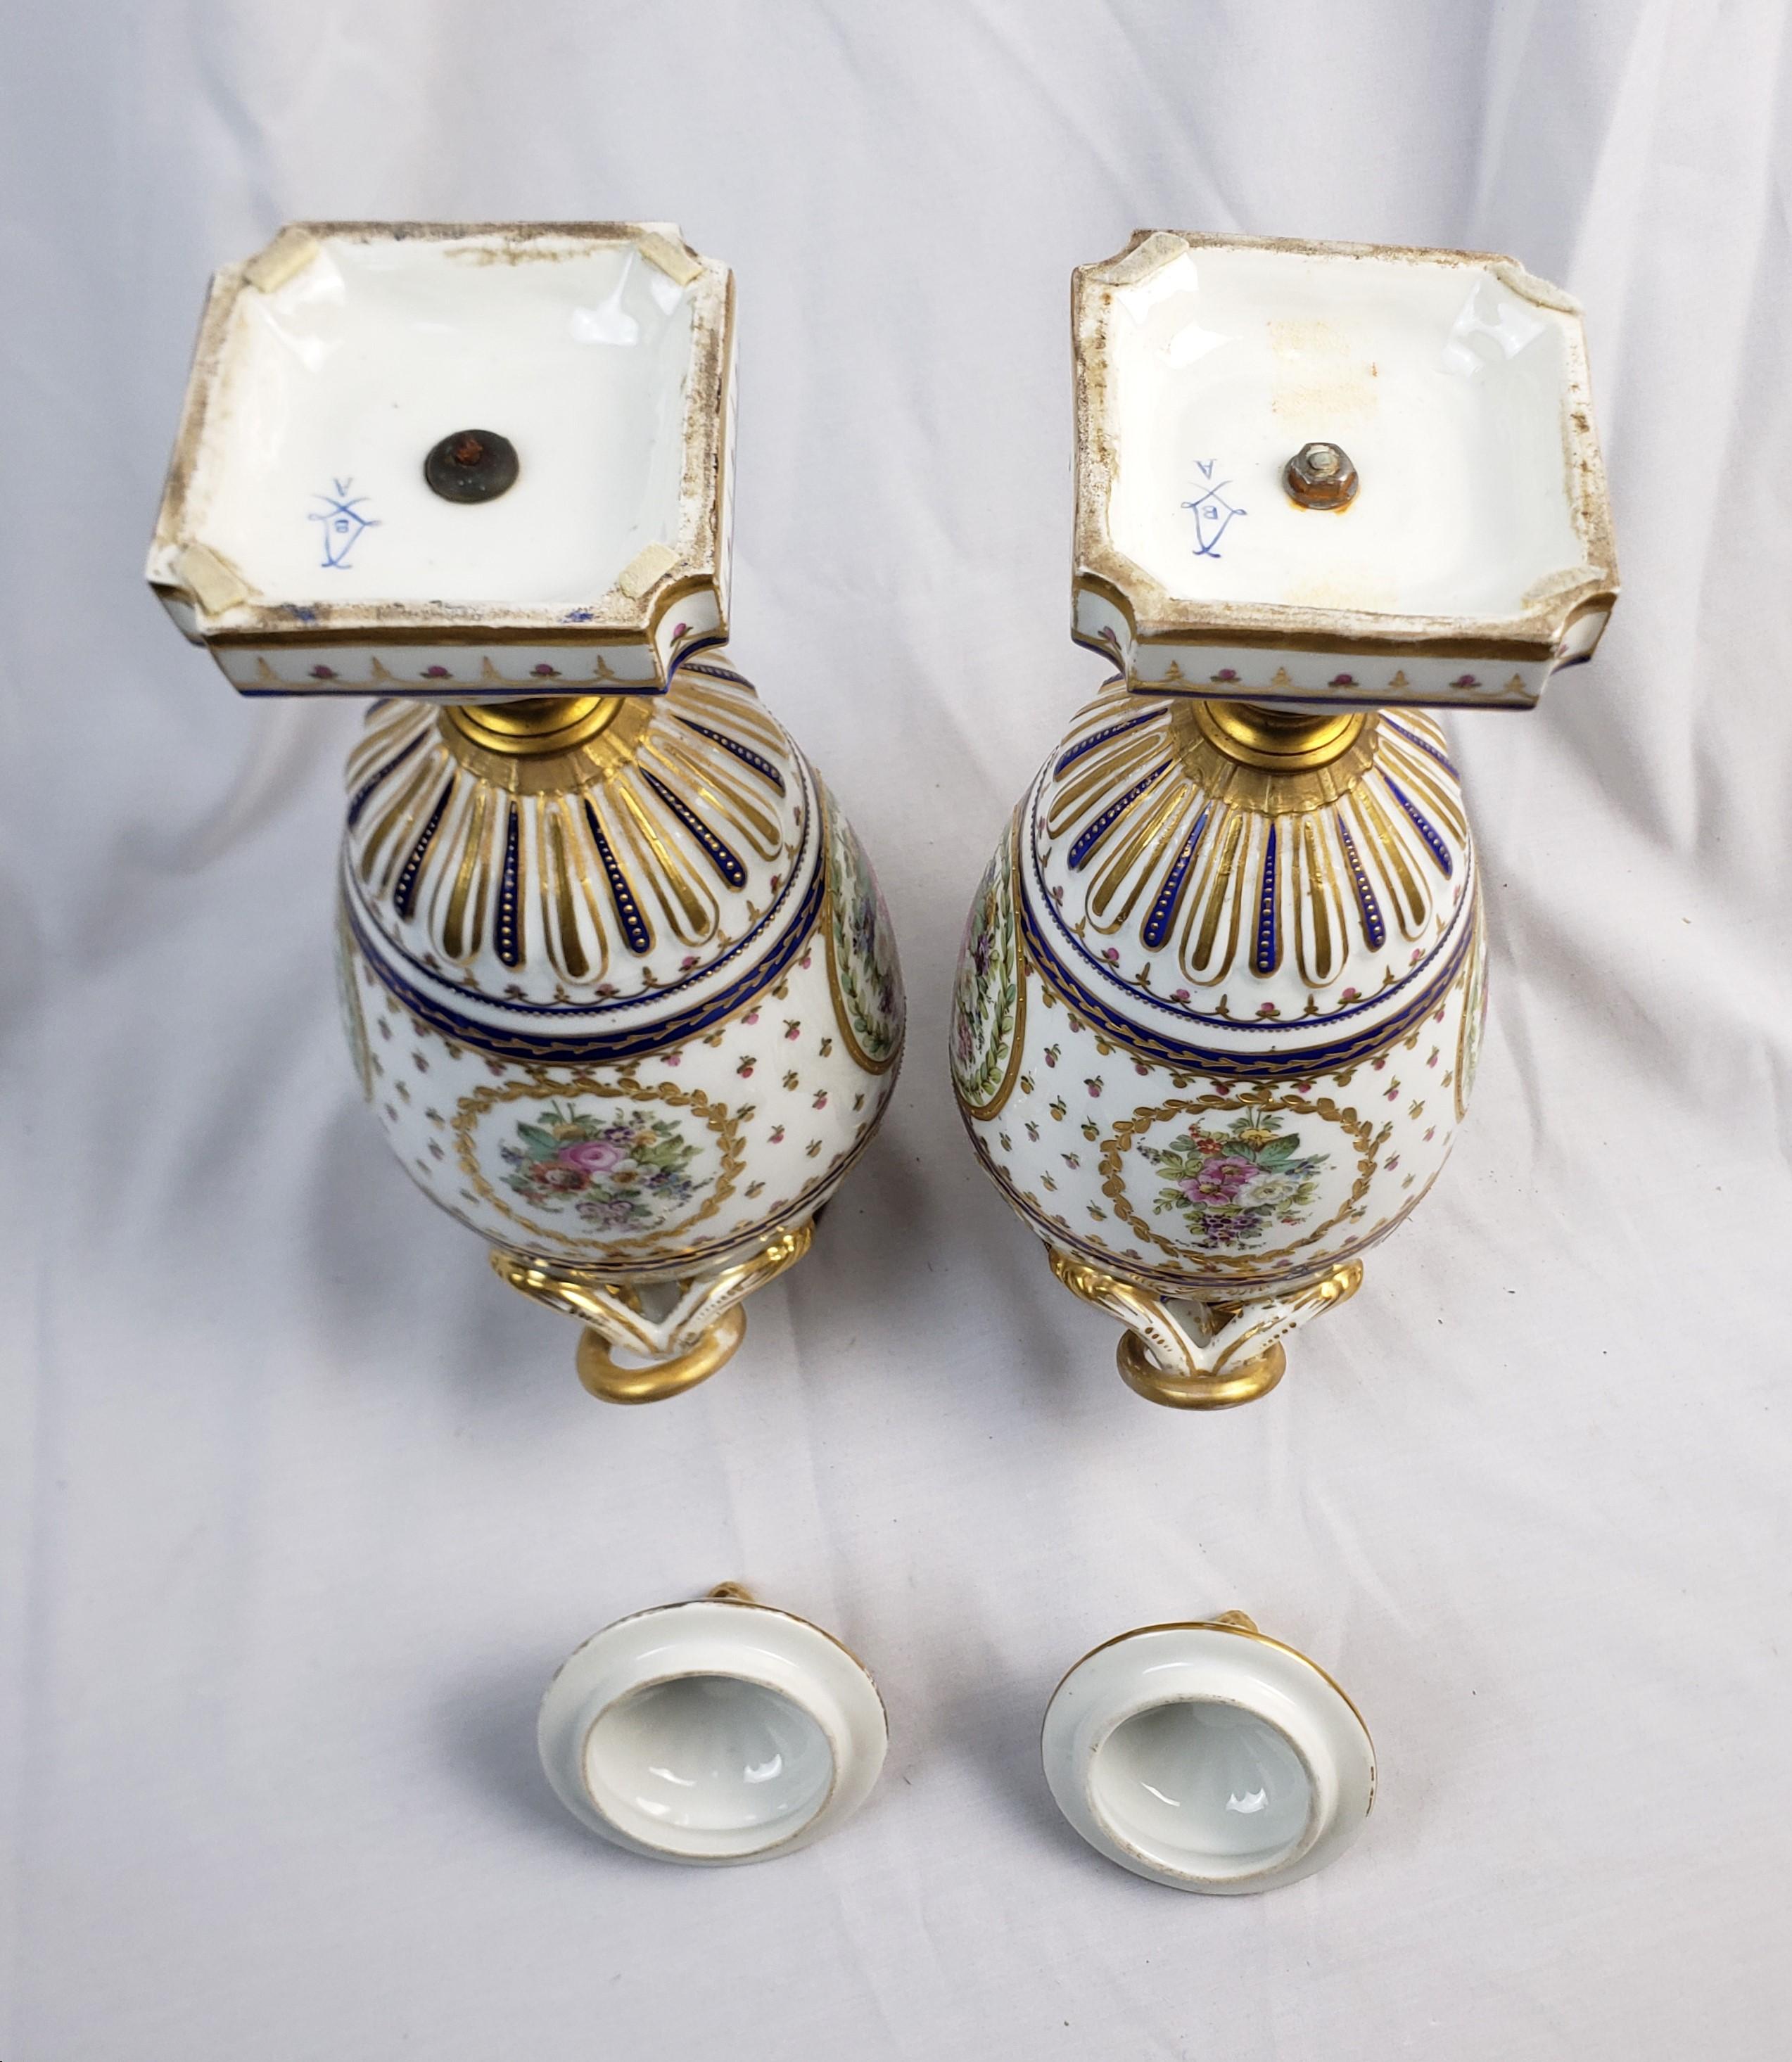 Pair of Antique Sevres Styled Covered Urns with Ornate Hand-Painted Decoration For Sale 3